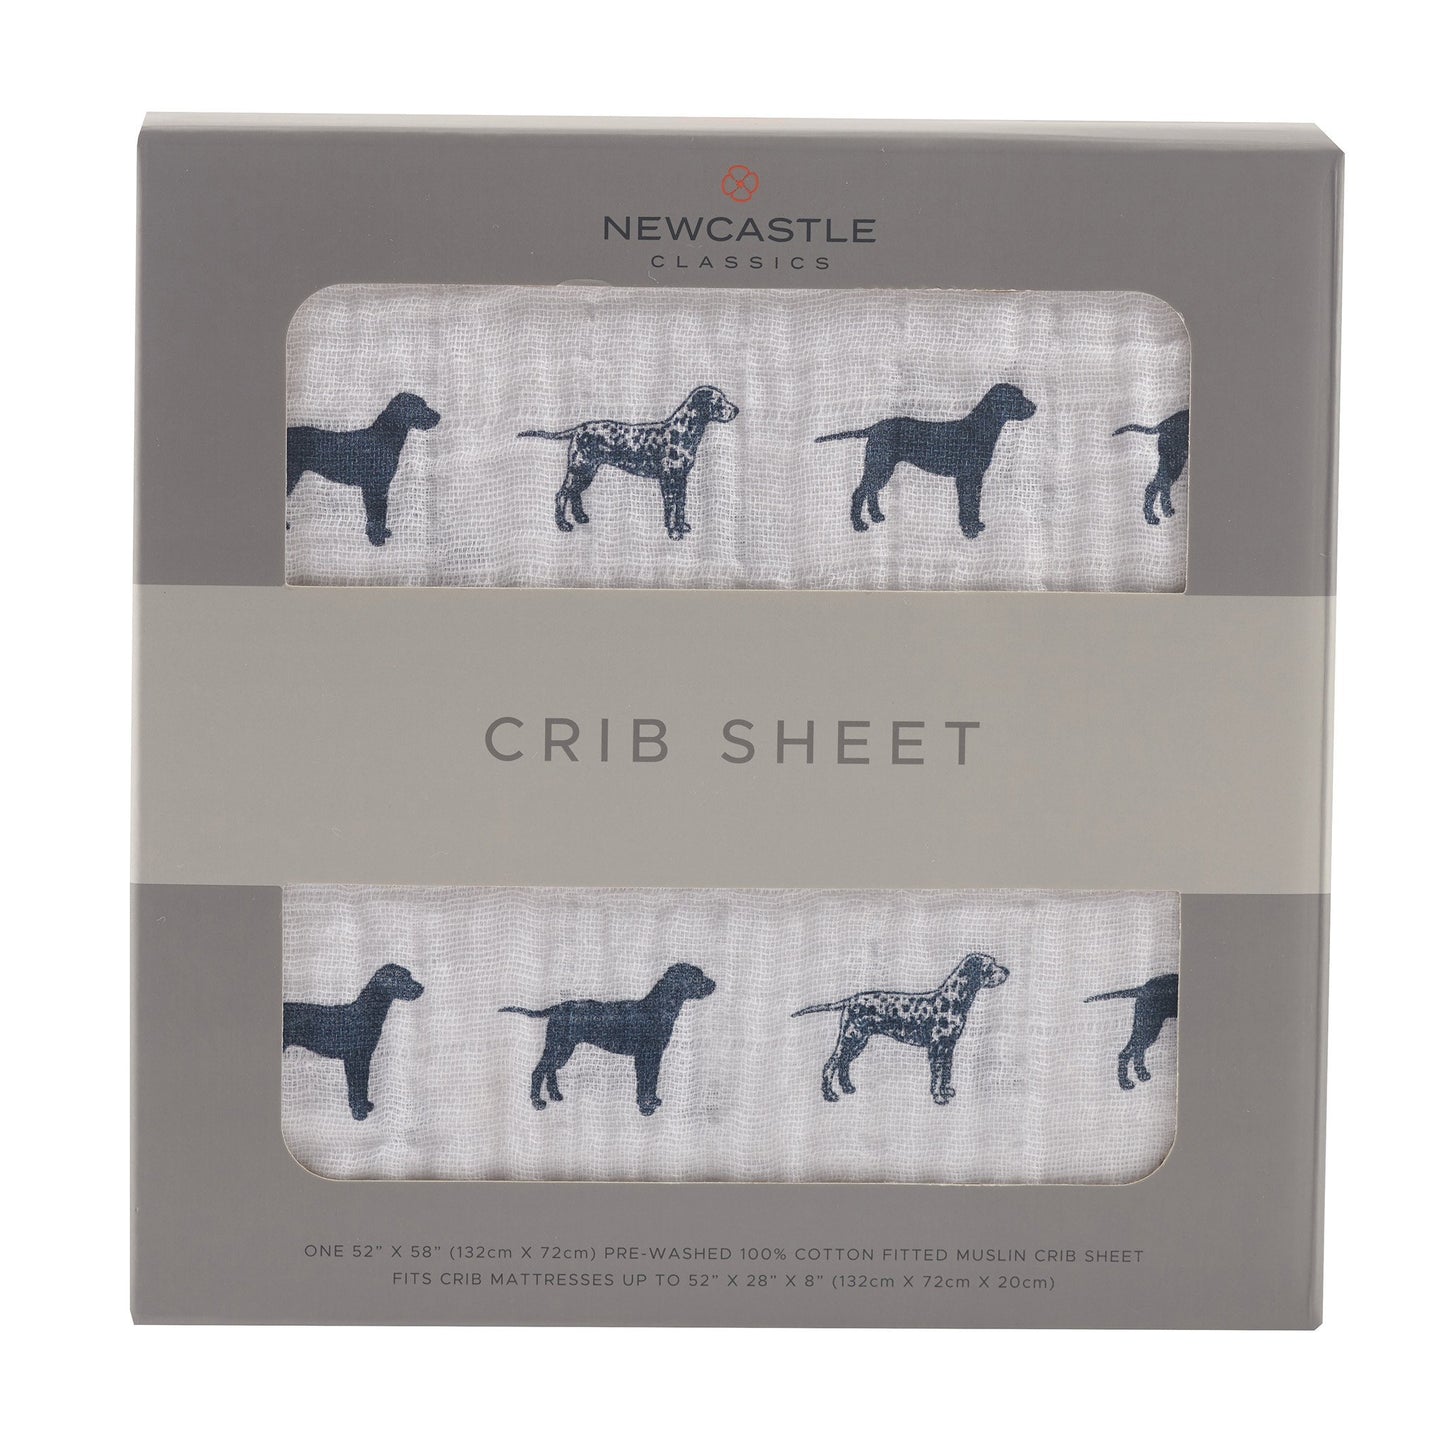 Breathable Cotton Muslin Crib Sheet for Sweet Dreams